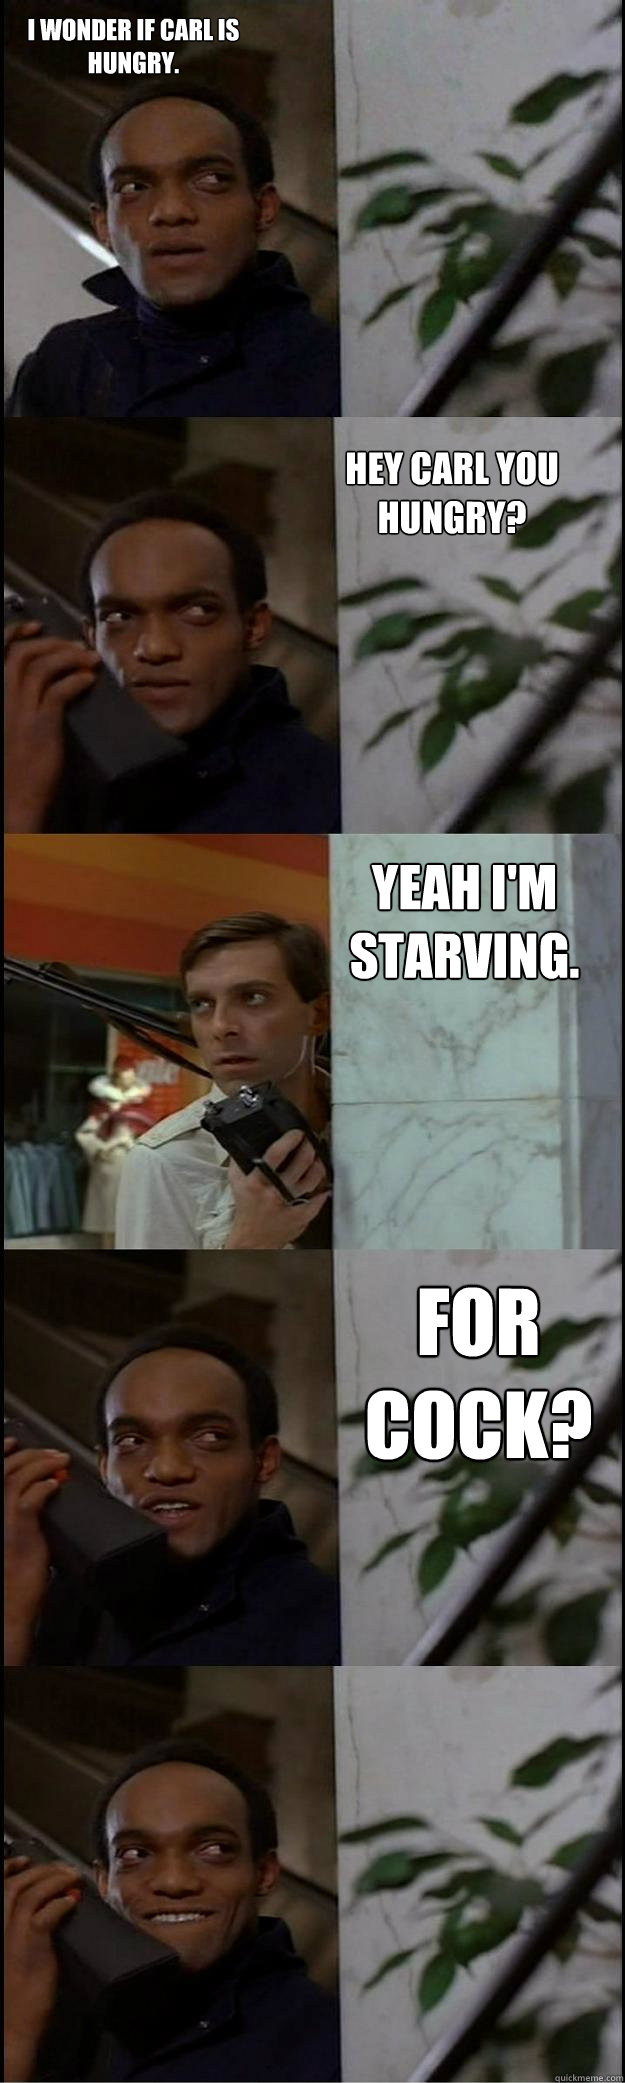 Hey Carl you hungry? Yeah I'm starving.  For Cock? I wonder if Carl is hungry. - Hey Carl you hungry? Yeah I'm starving.  For Cock? I wonder if Carl is hungry.  Dawn of the Dead